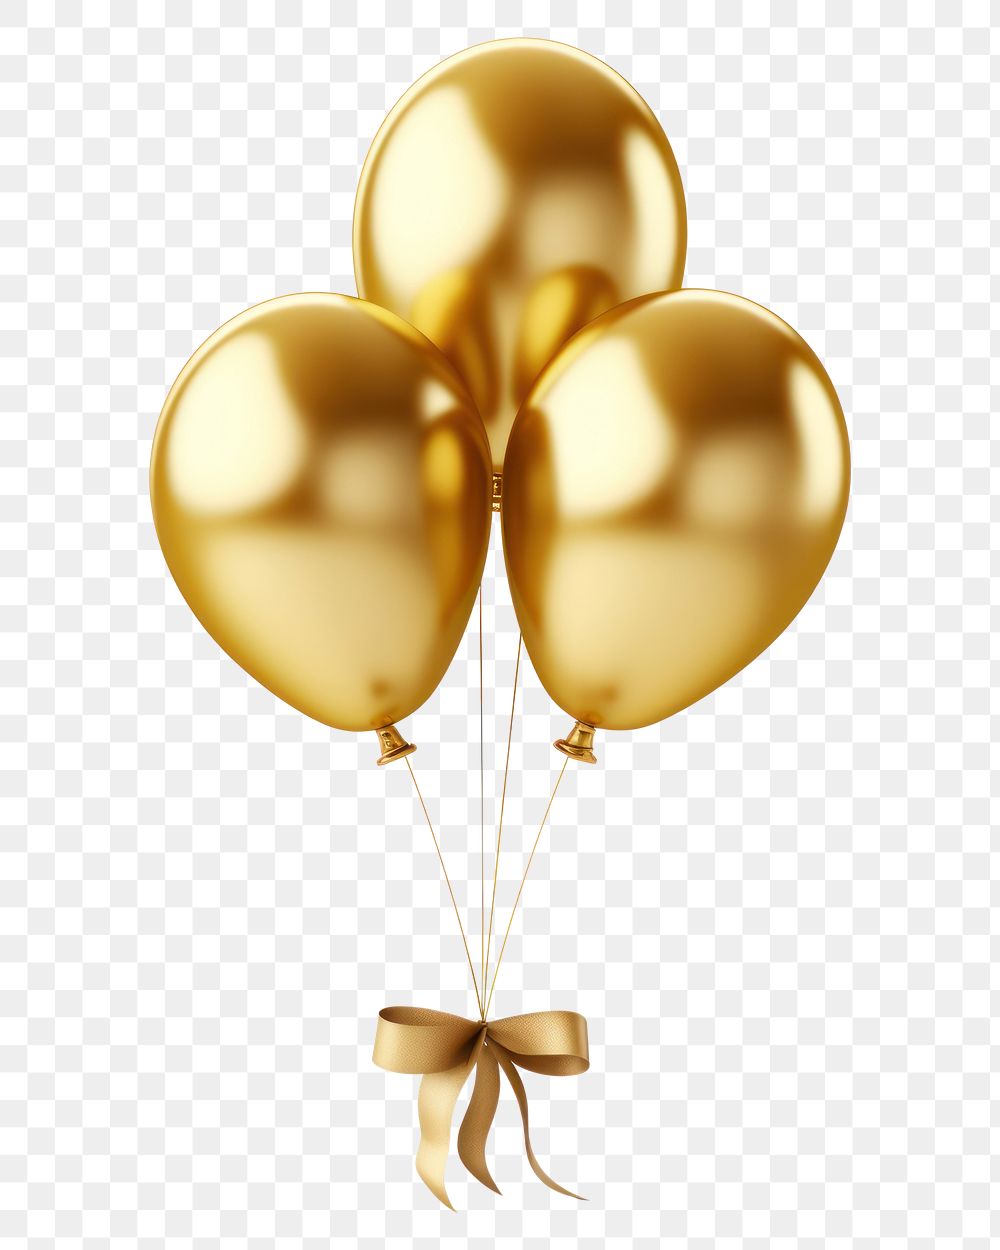 PNG Simple busket balloon icon shiny gold white background.